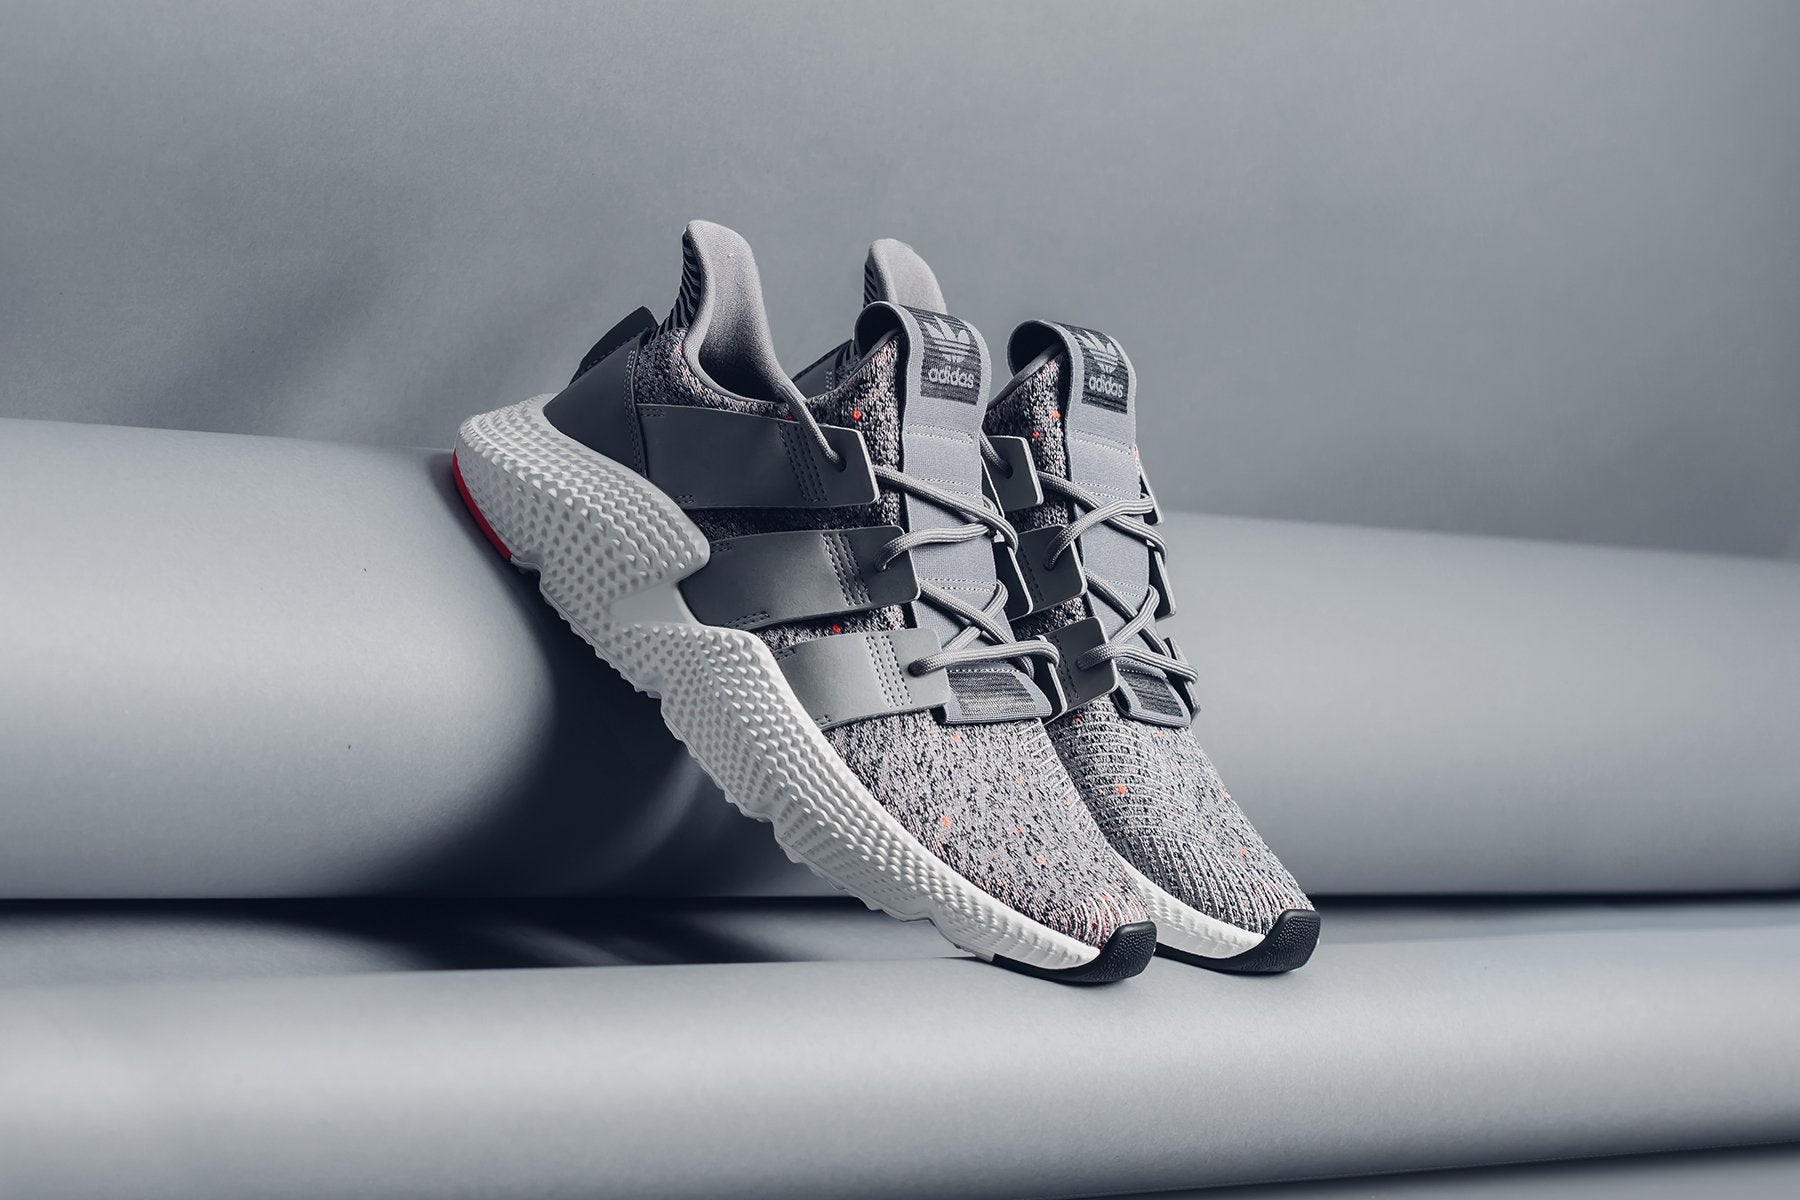 Adidas Originals Prophere "Grey/White/Solar Available Now – Feature